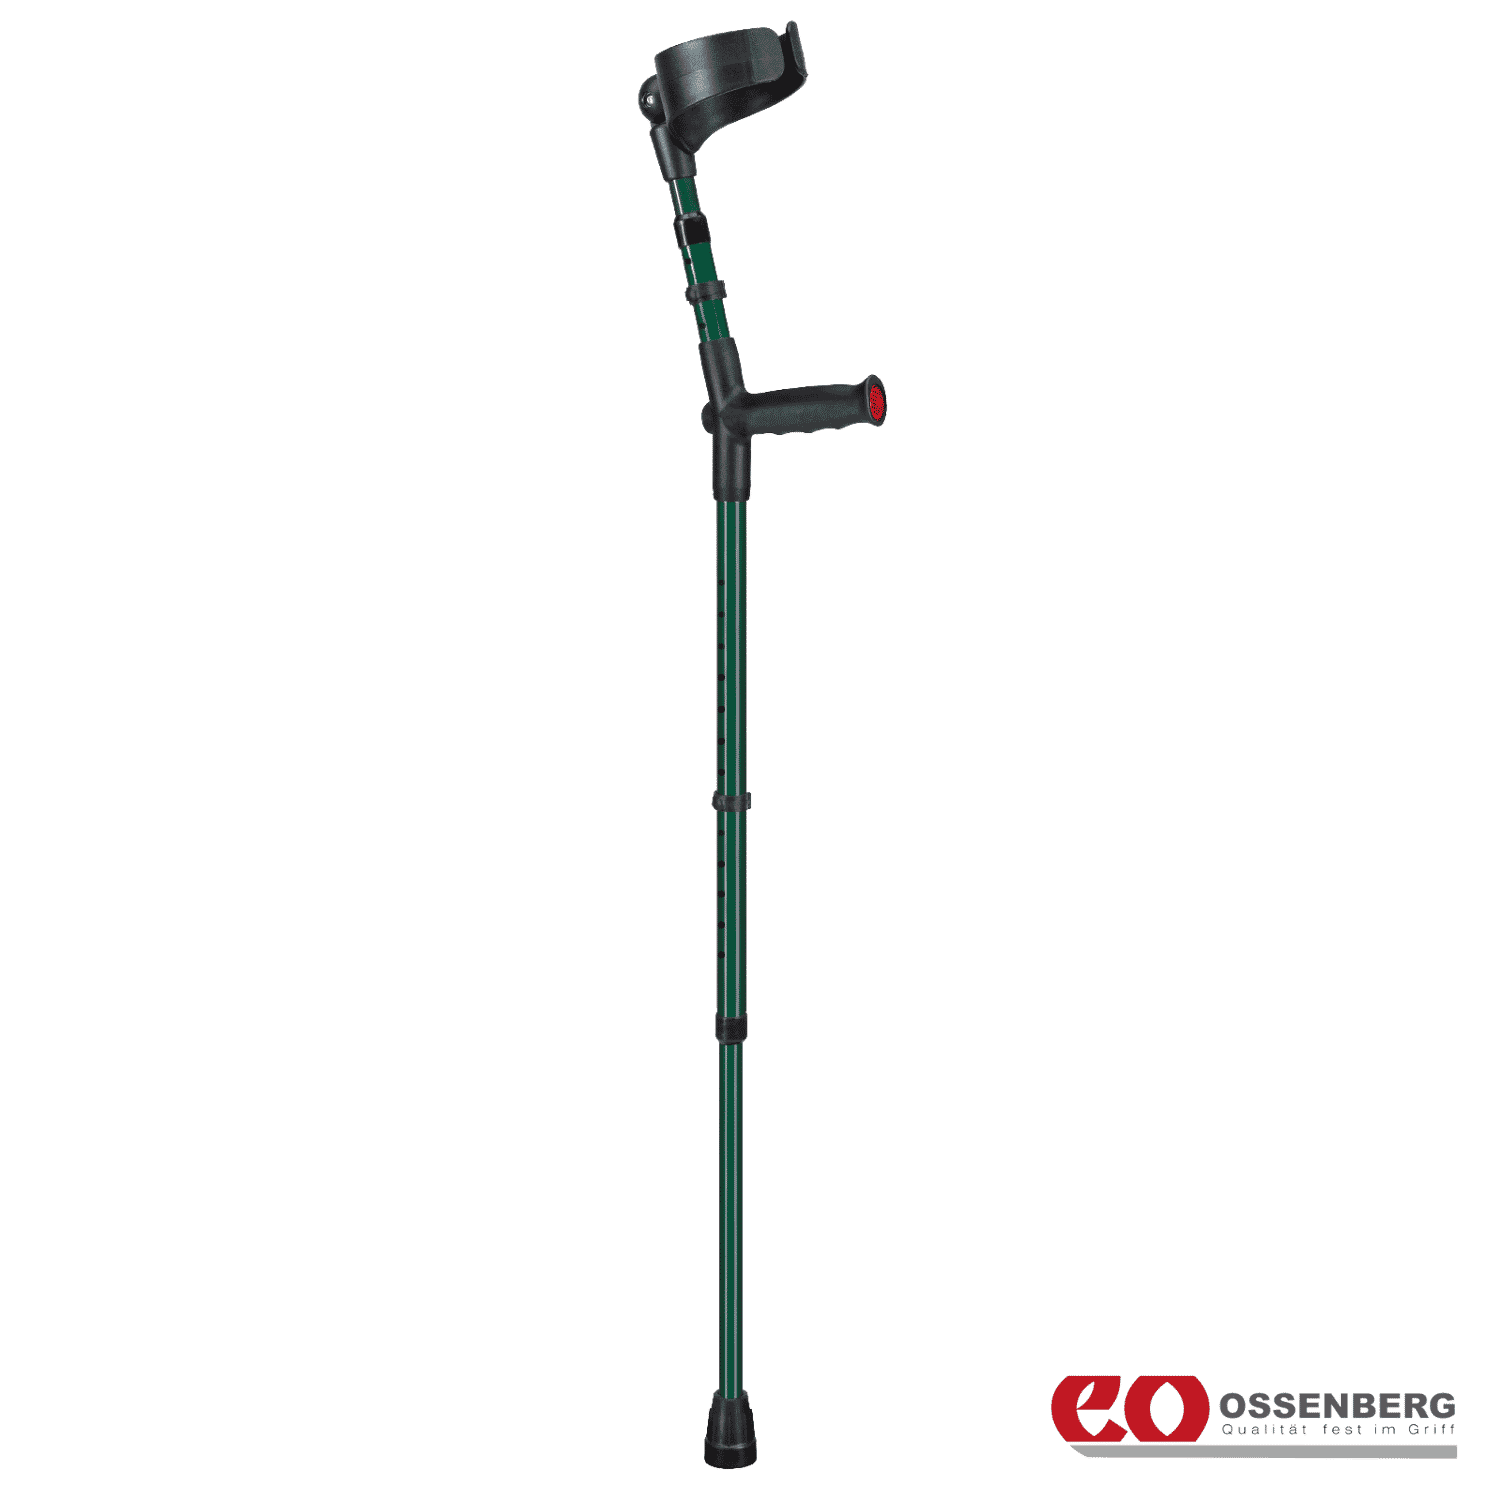 View Ossenberg Soft Grip Double Adjustable Crutches British Racing Green Single information